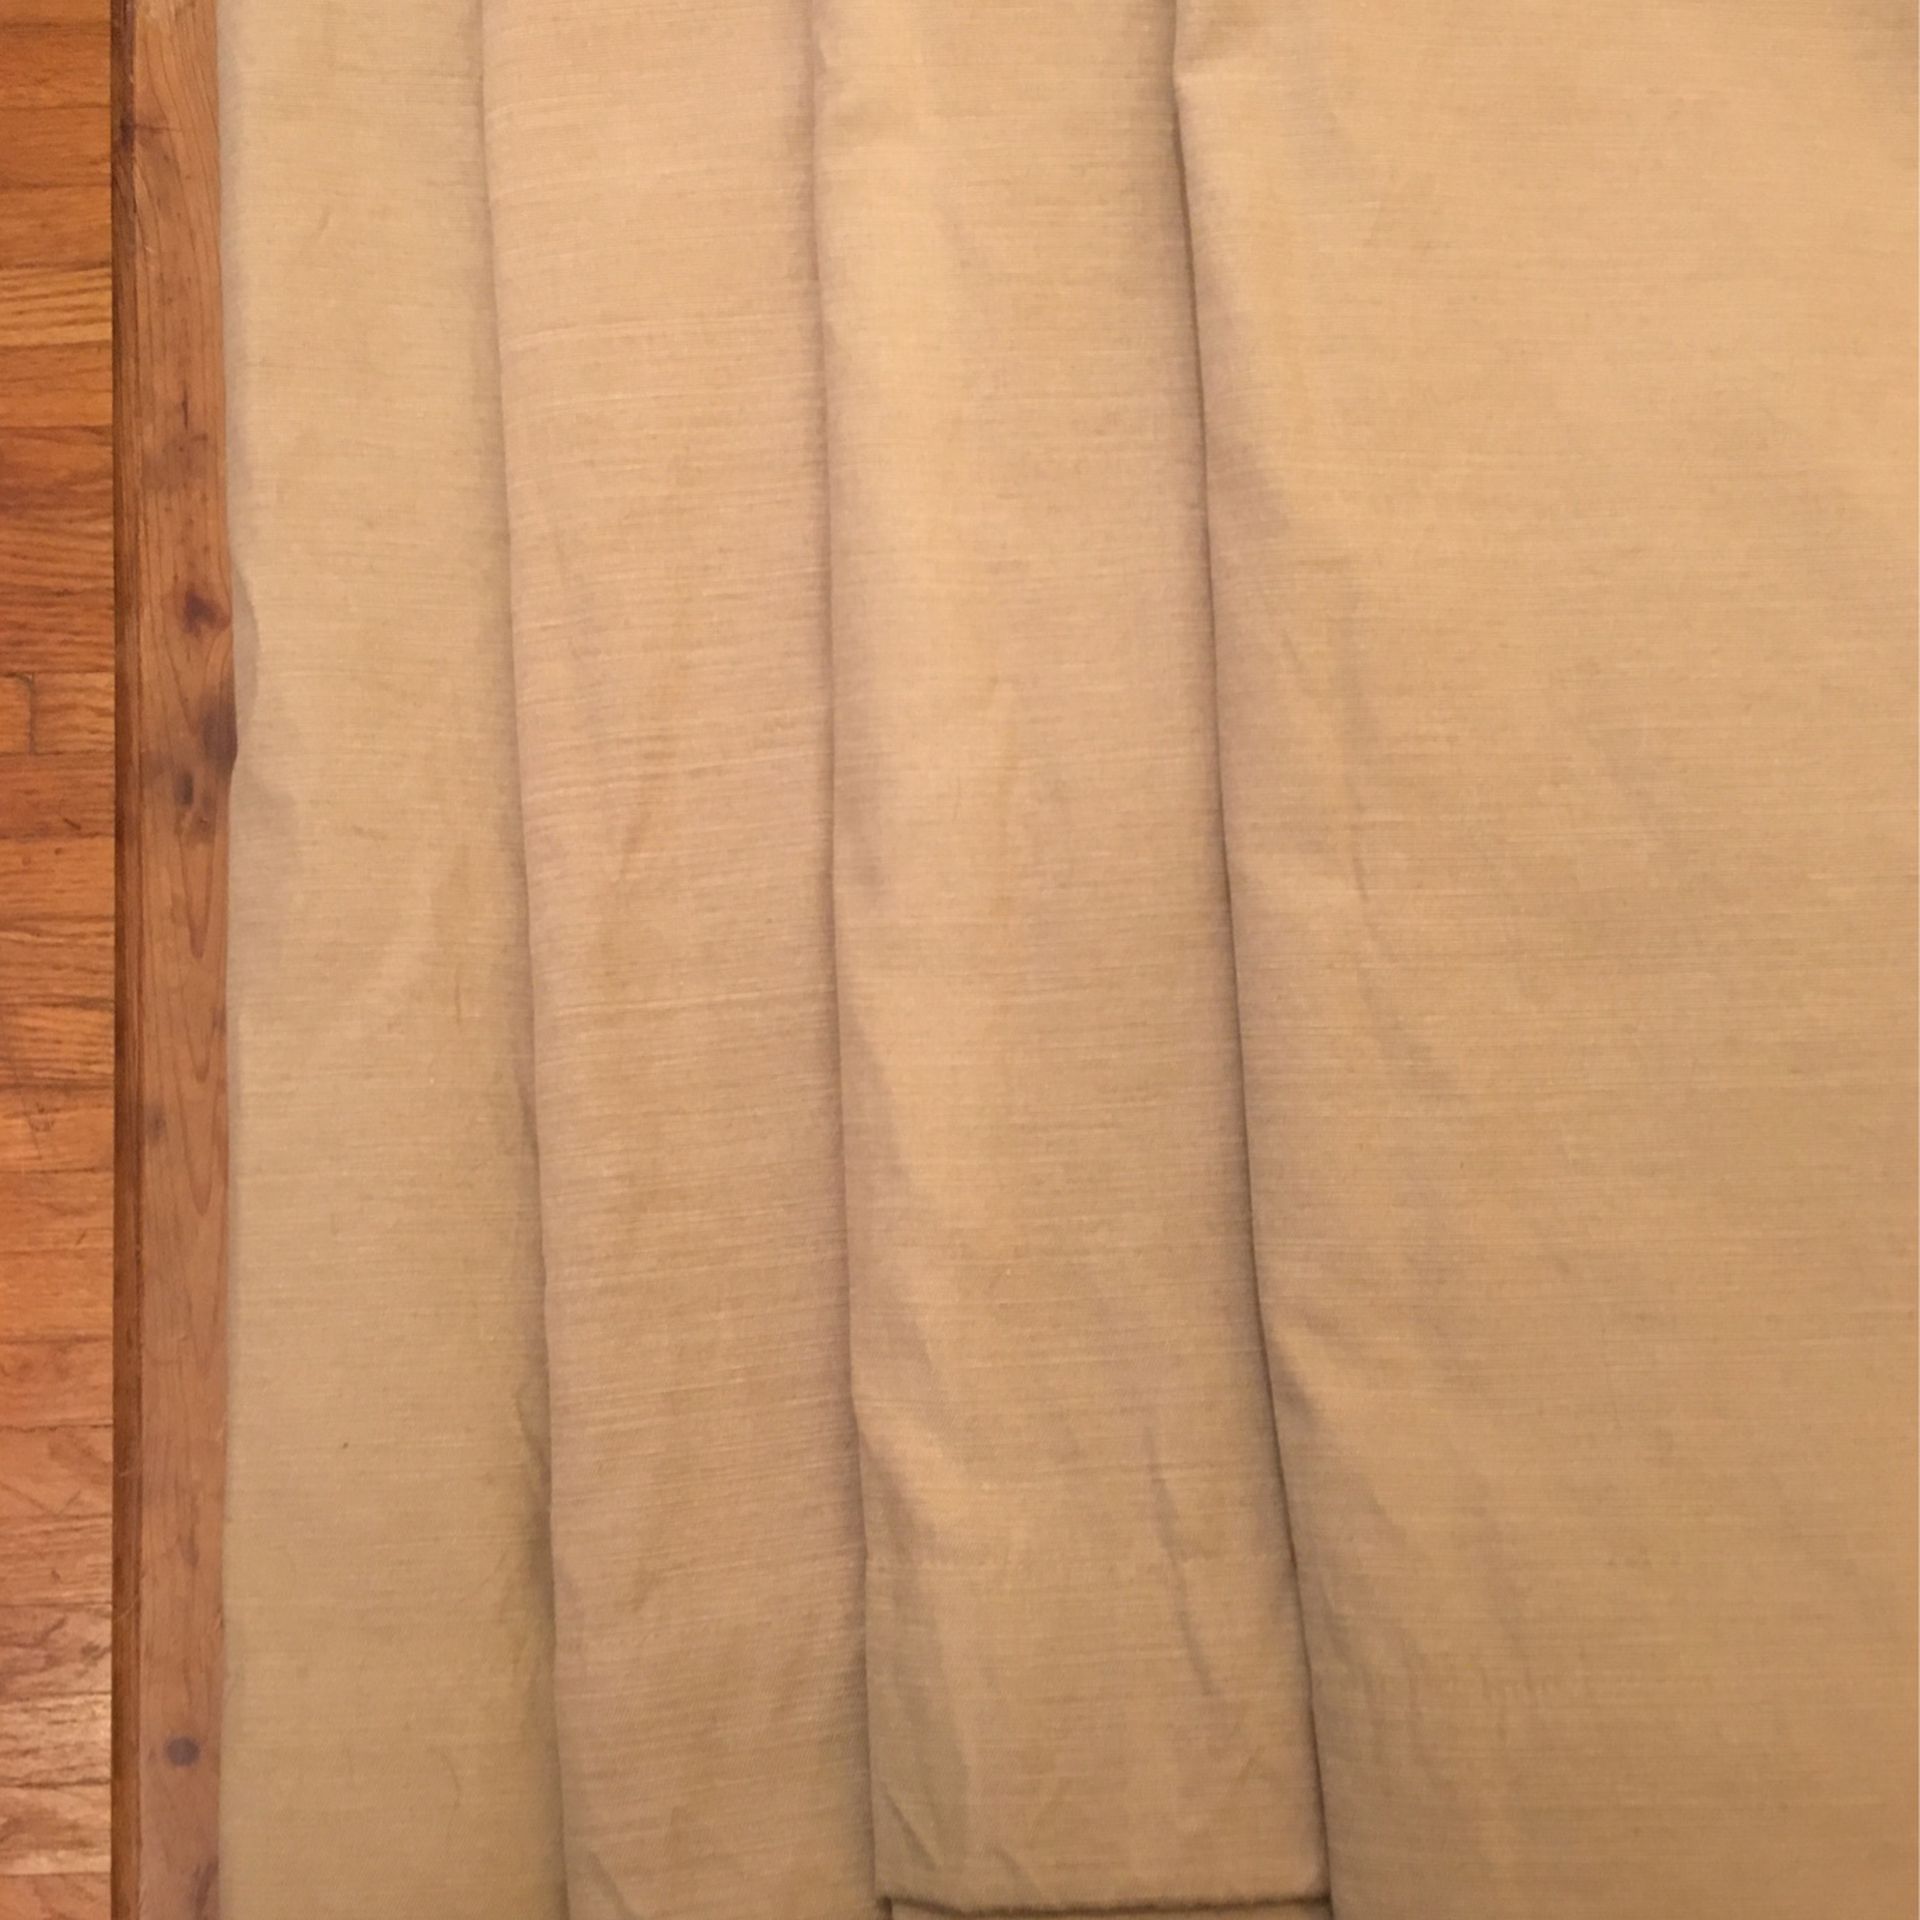 4 Long Tan Colored Curtain Panels from Target